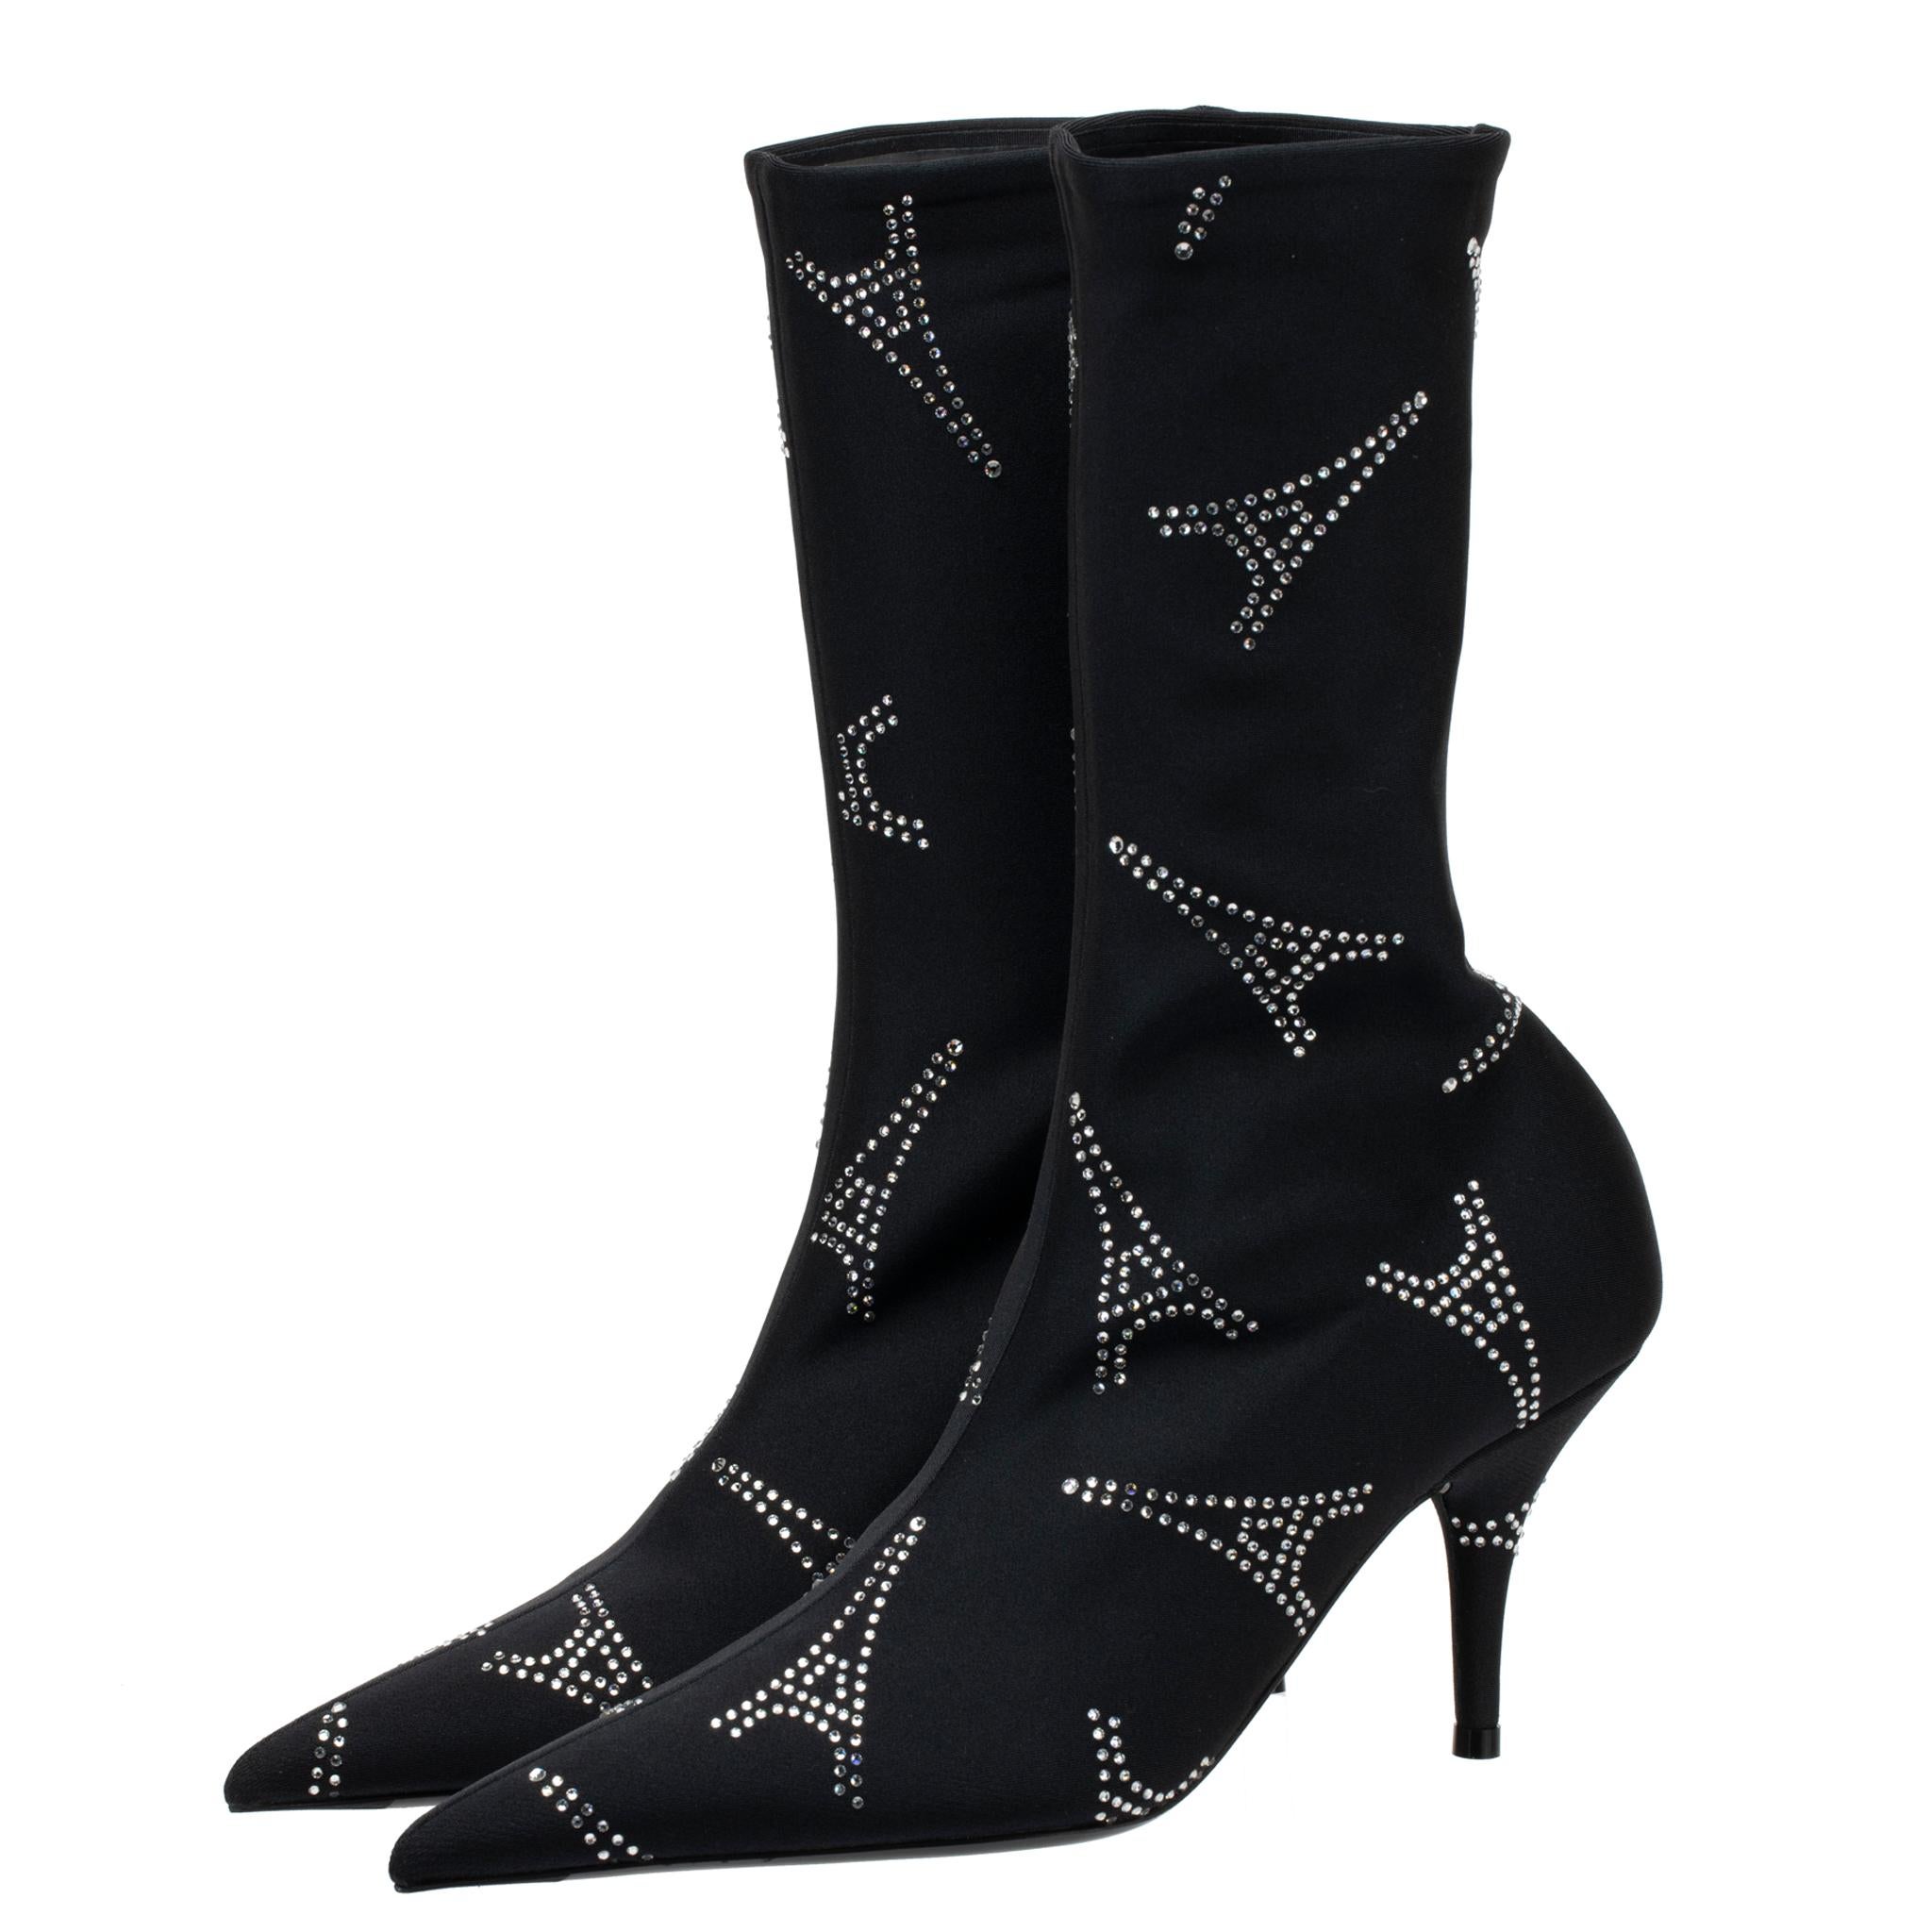 Balenciaga Eiffel Tower Crystal Stretch Knit Knife Boot Black 35 FR In New Condition For Sale In DOUBLE BAY, NSW